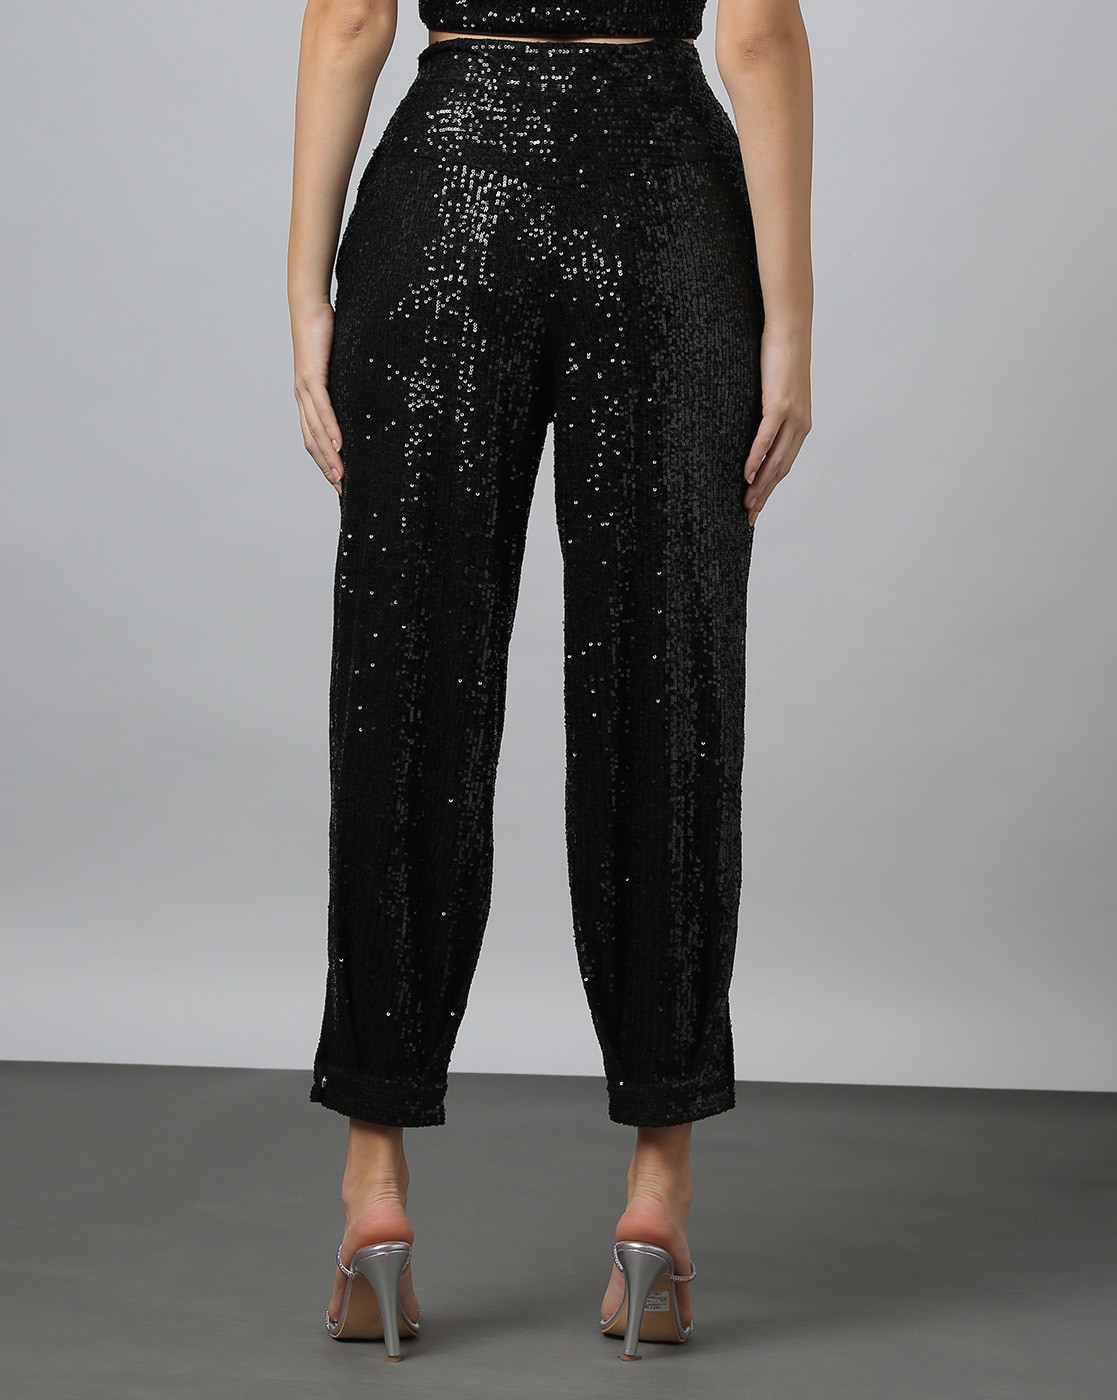 Cutistation Black Sequin Pants for Women Sexy High Waisted Bell Bottom  Sparkly Glitter Trousers Party Club